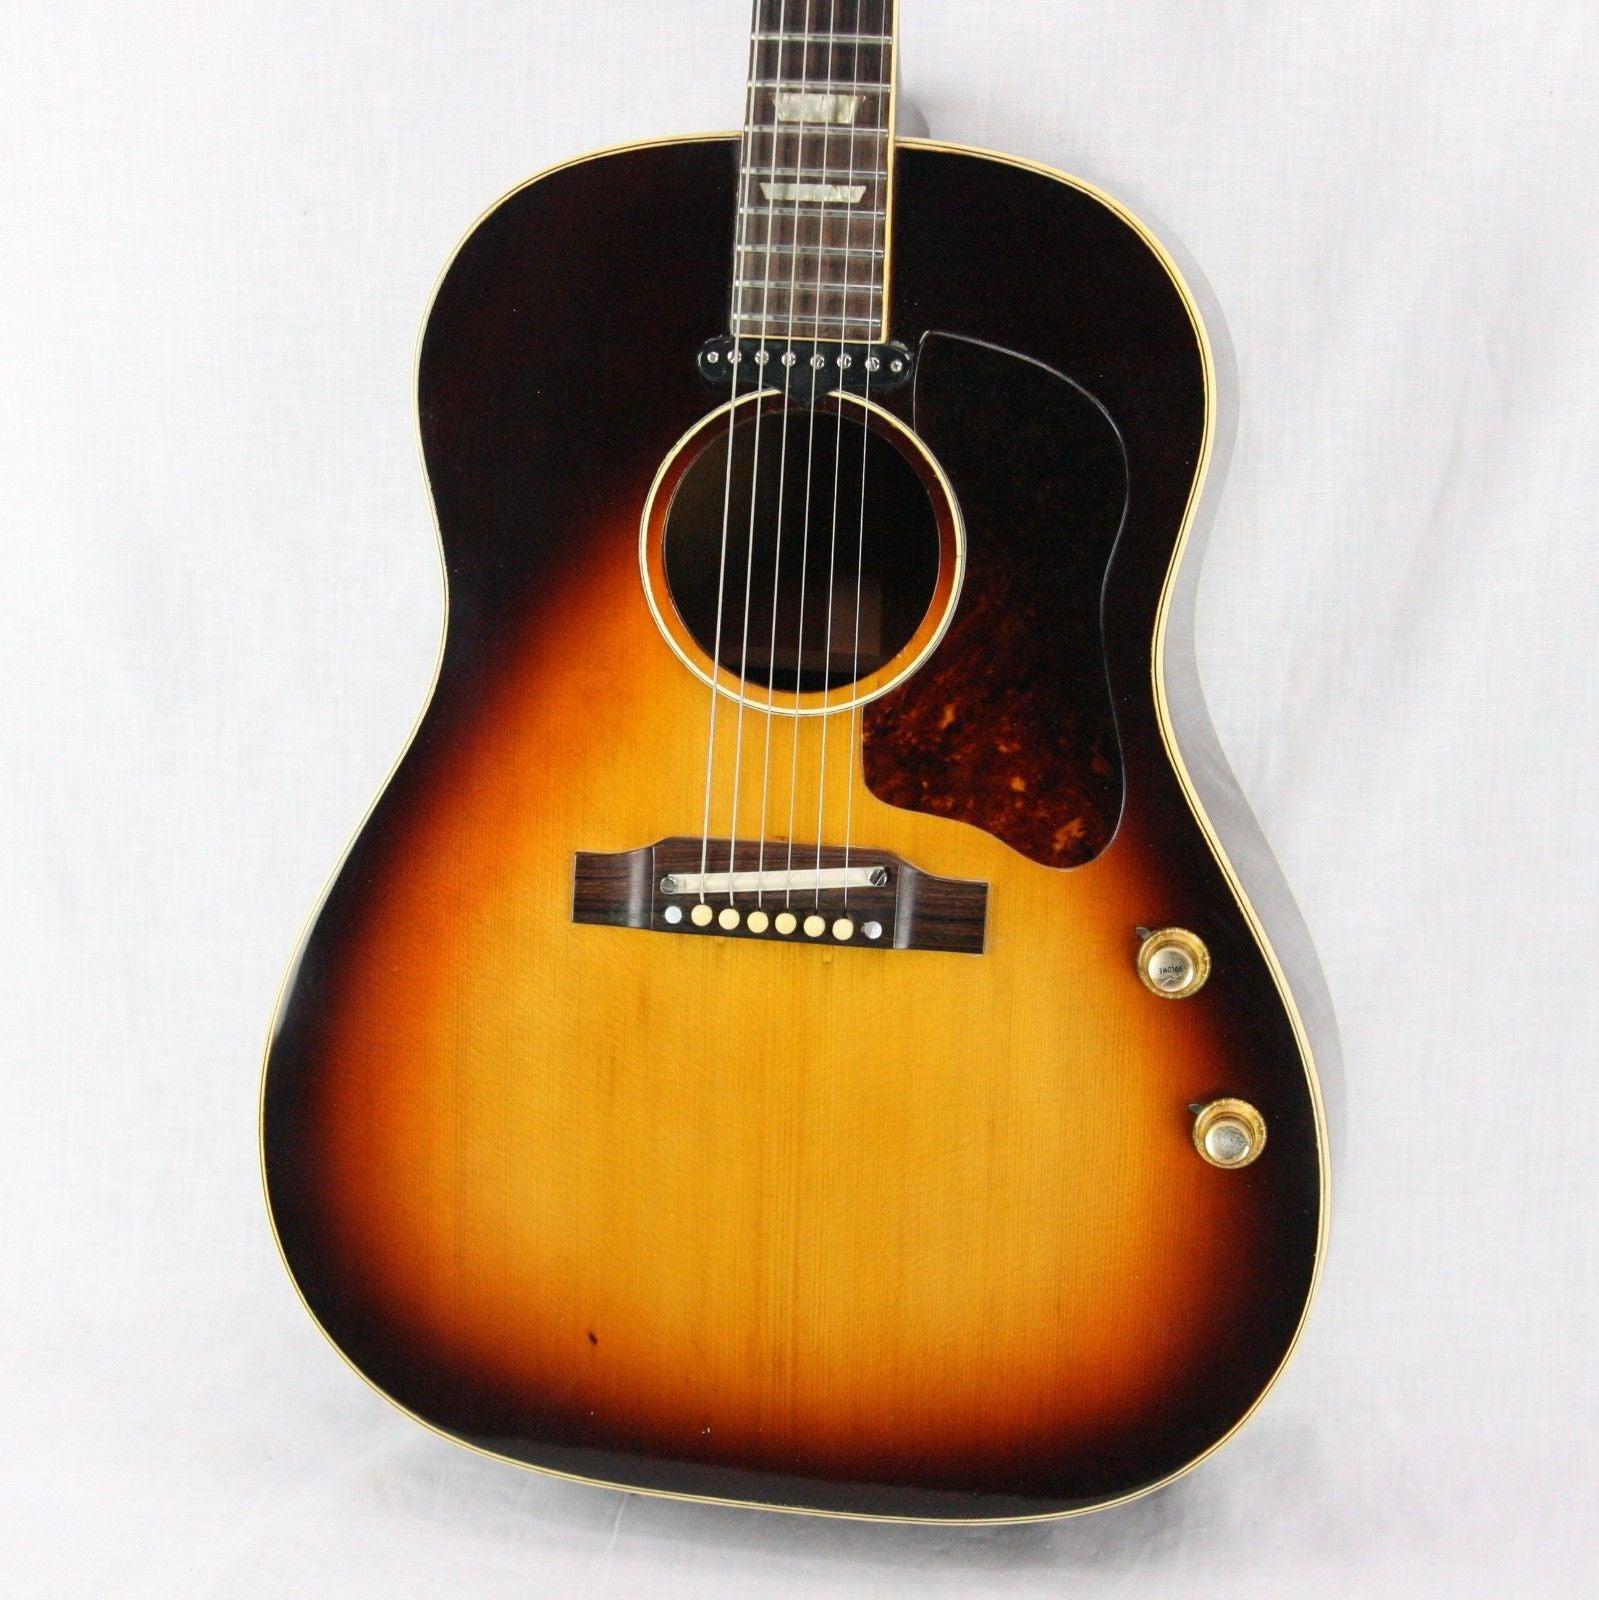 *SOLD*  1962 Gibson J-160E Restored Vintage Guitar! Same year as John Lennon! REAL THING